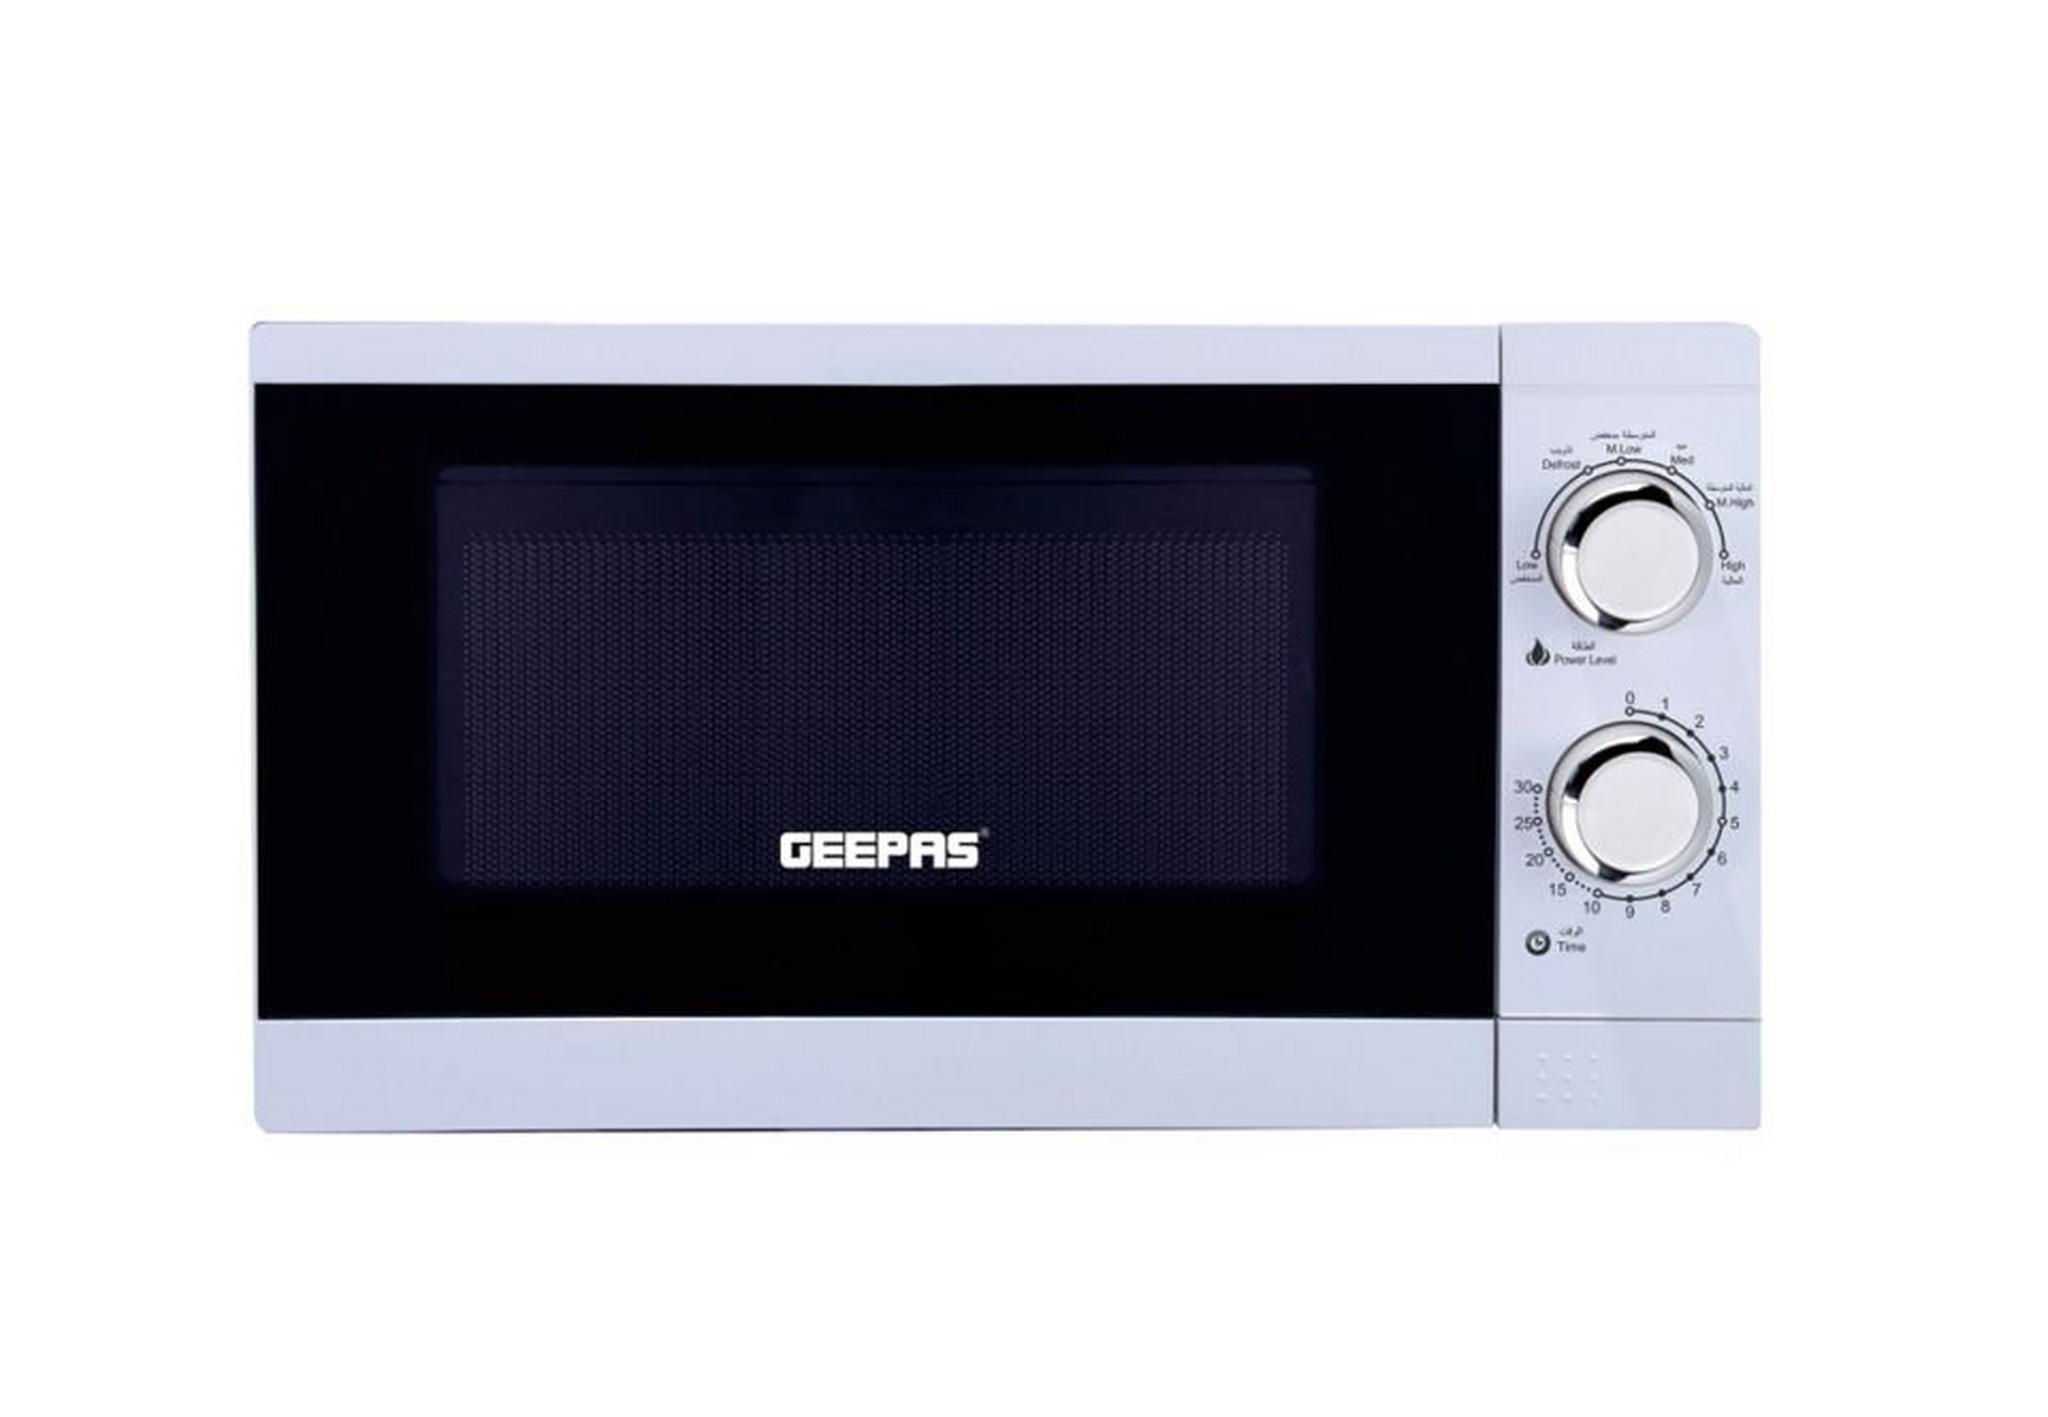 Geepas 20L 1200Watts Microwave Oven (GMO1894) - White